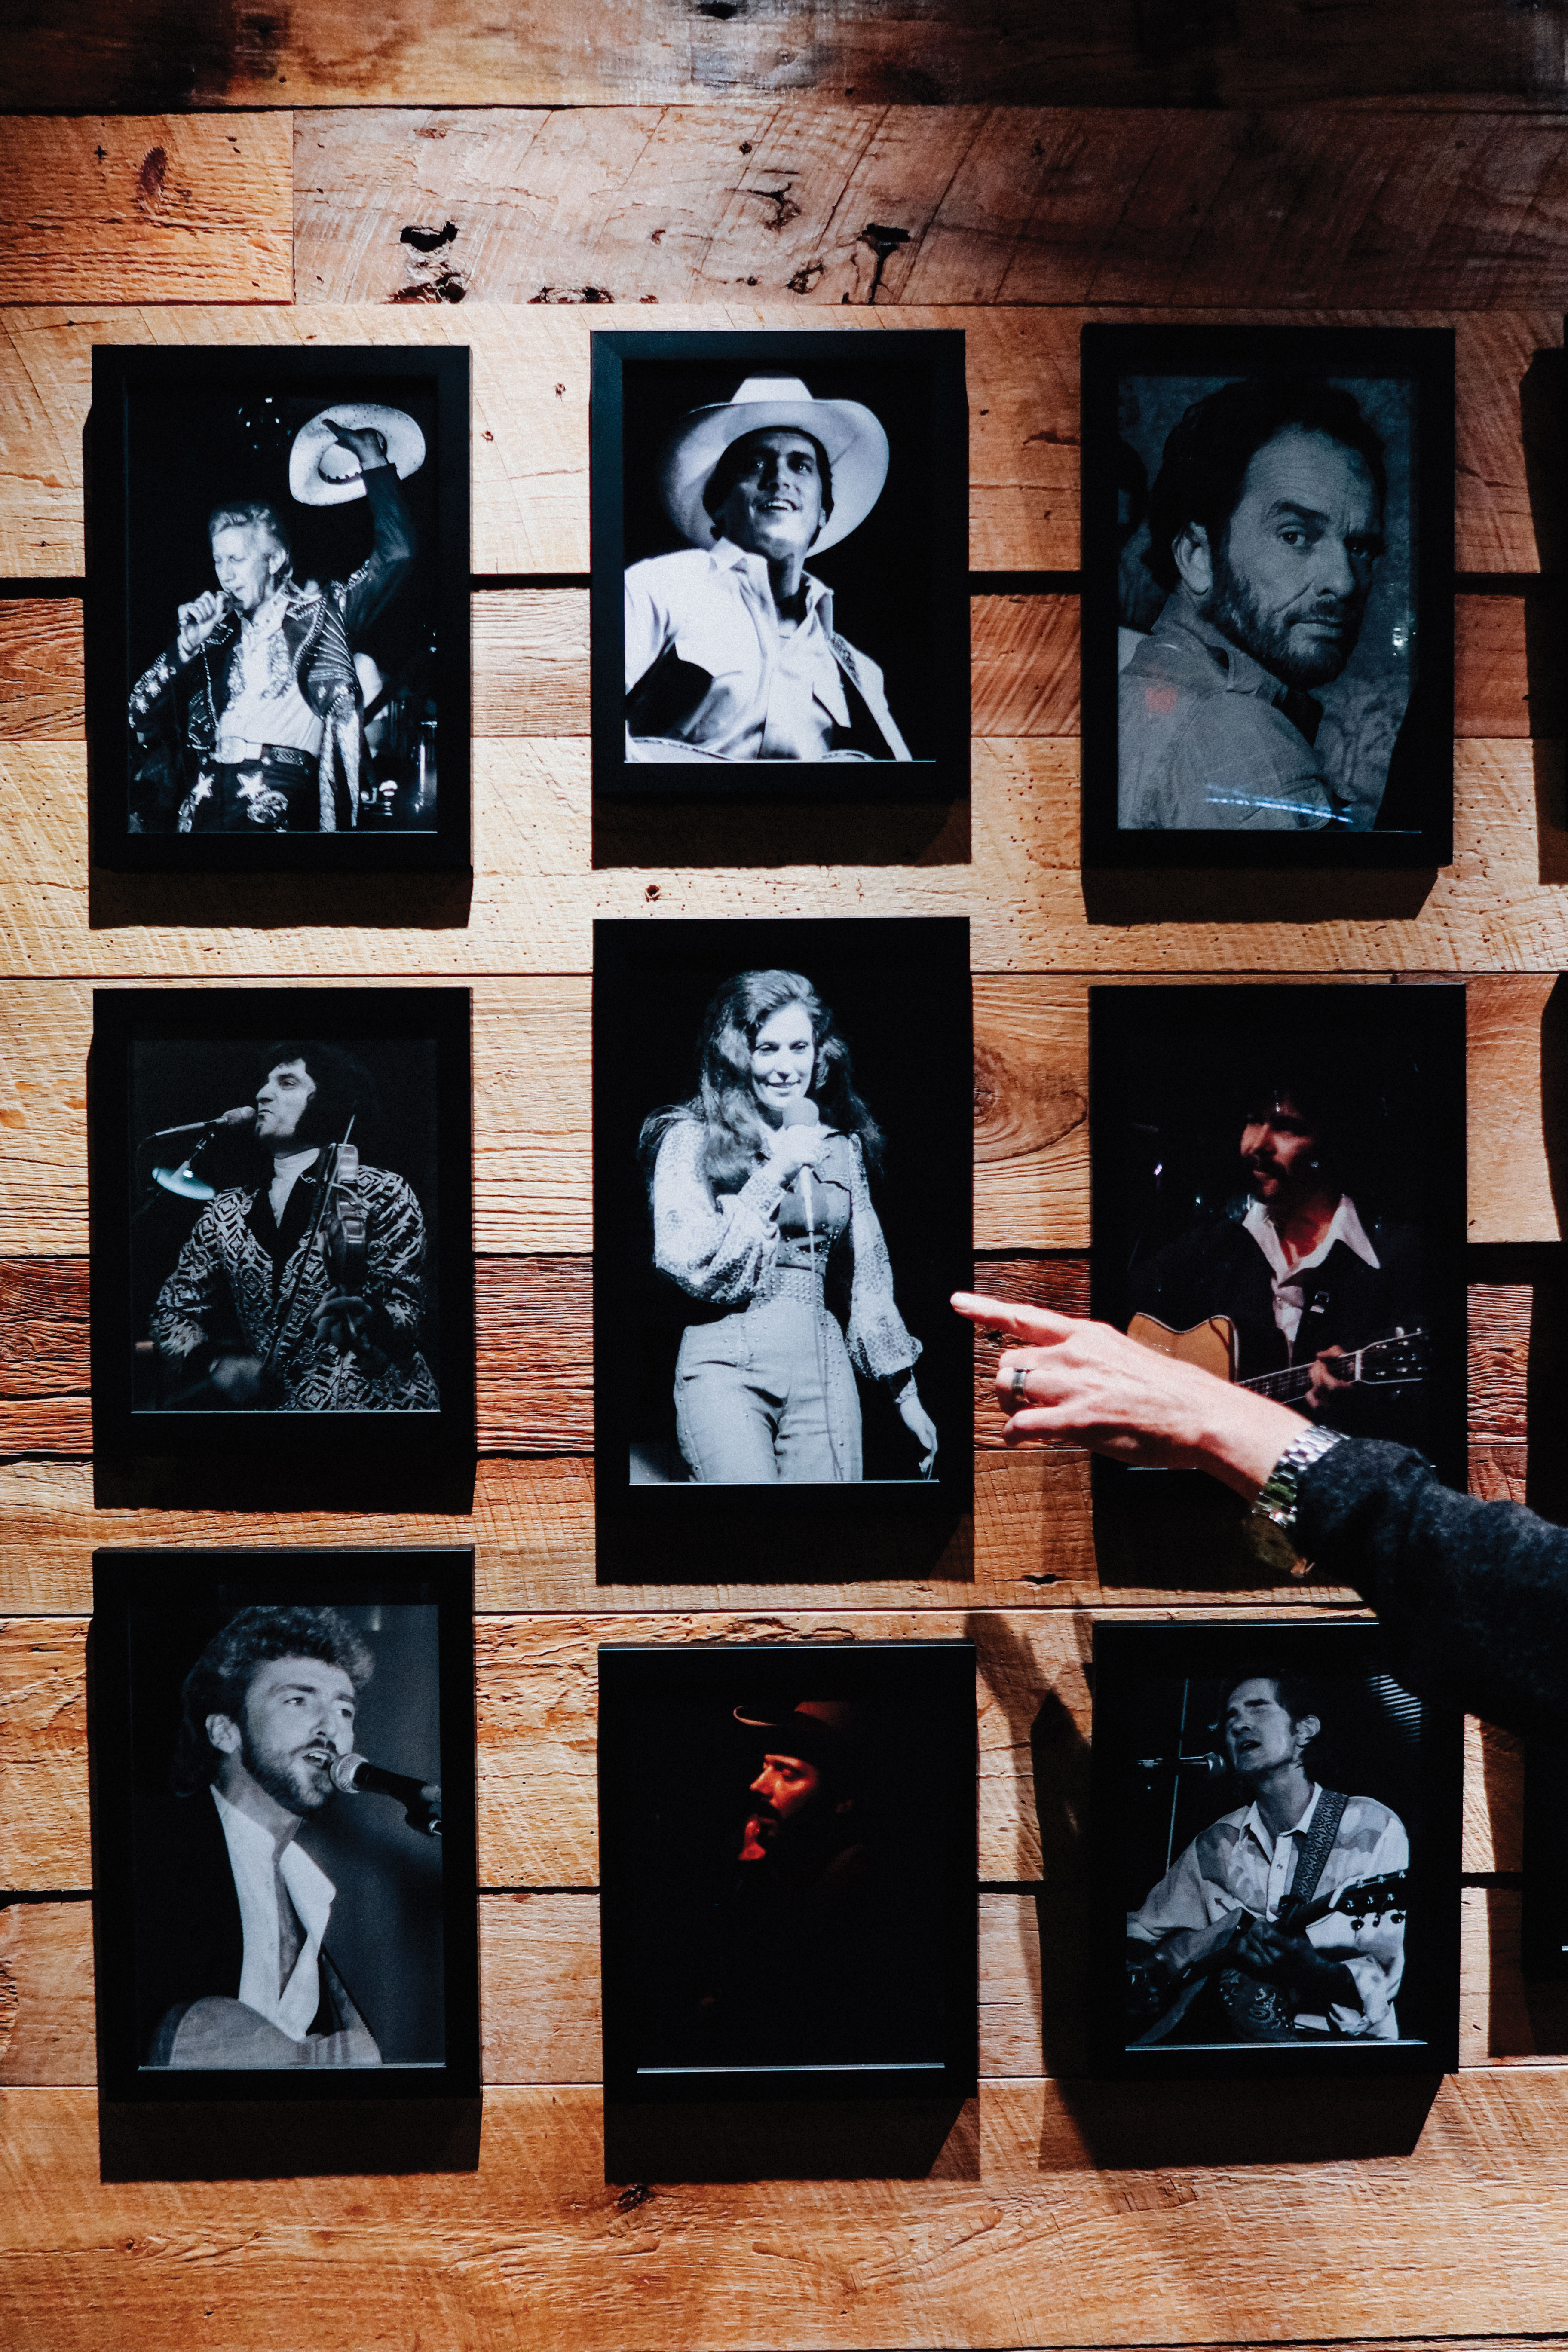 Photos of musicians at the Bobby Hotel.